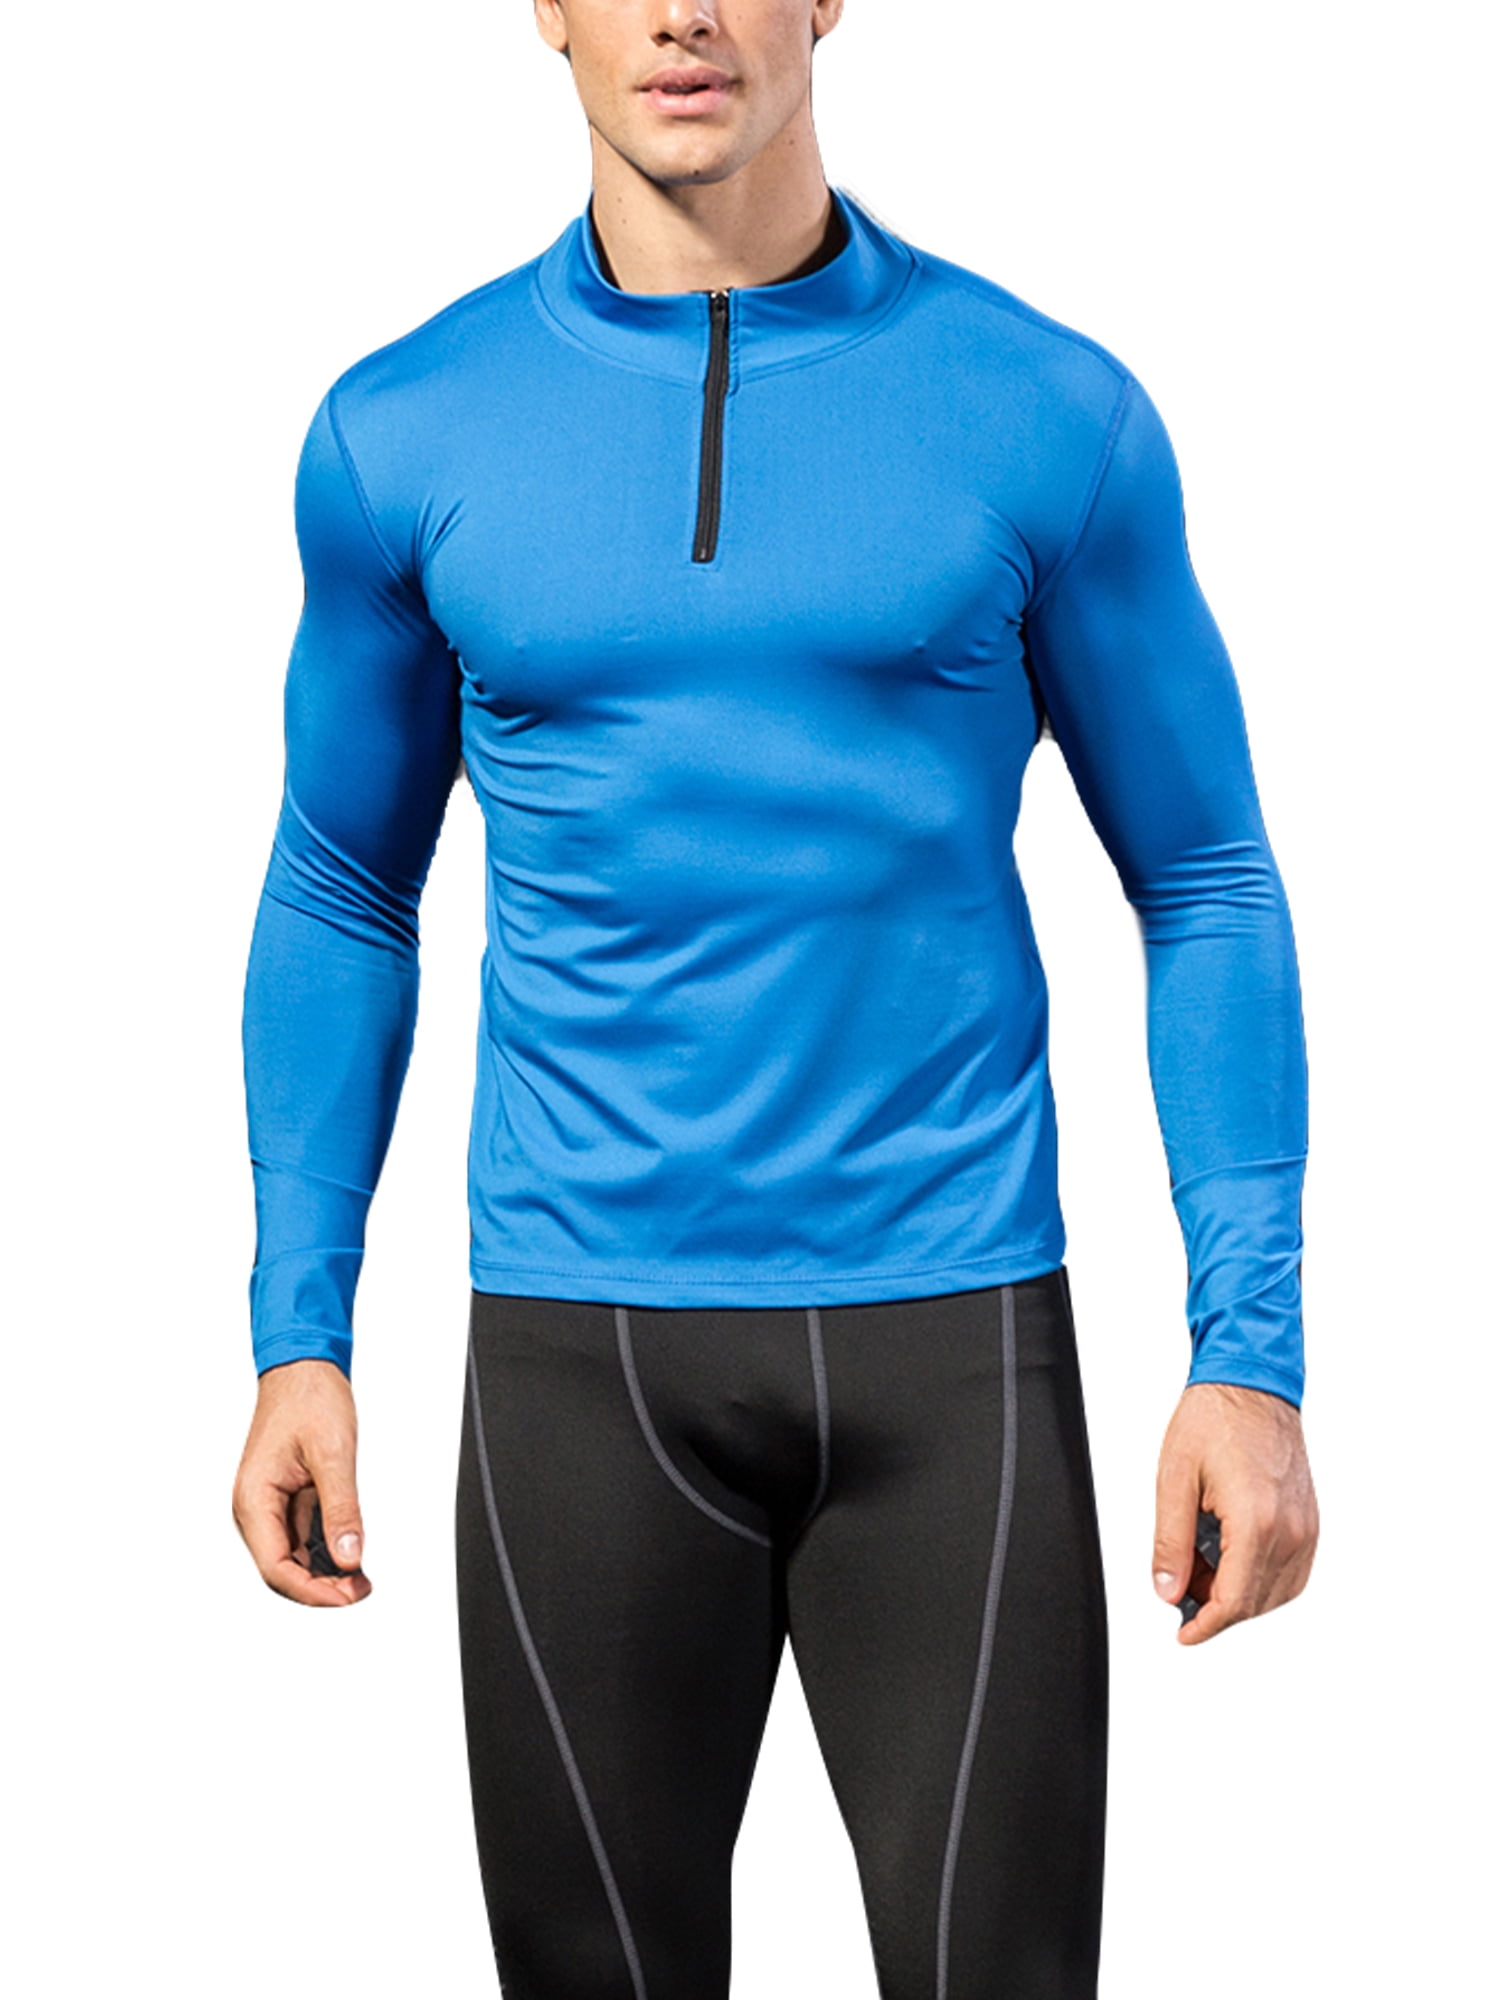 Mens Sports Workout Shirt Mock Neck 1/4 Zip Compression Tight fit Tops Cool dry 